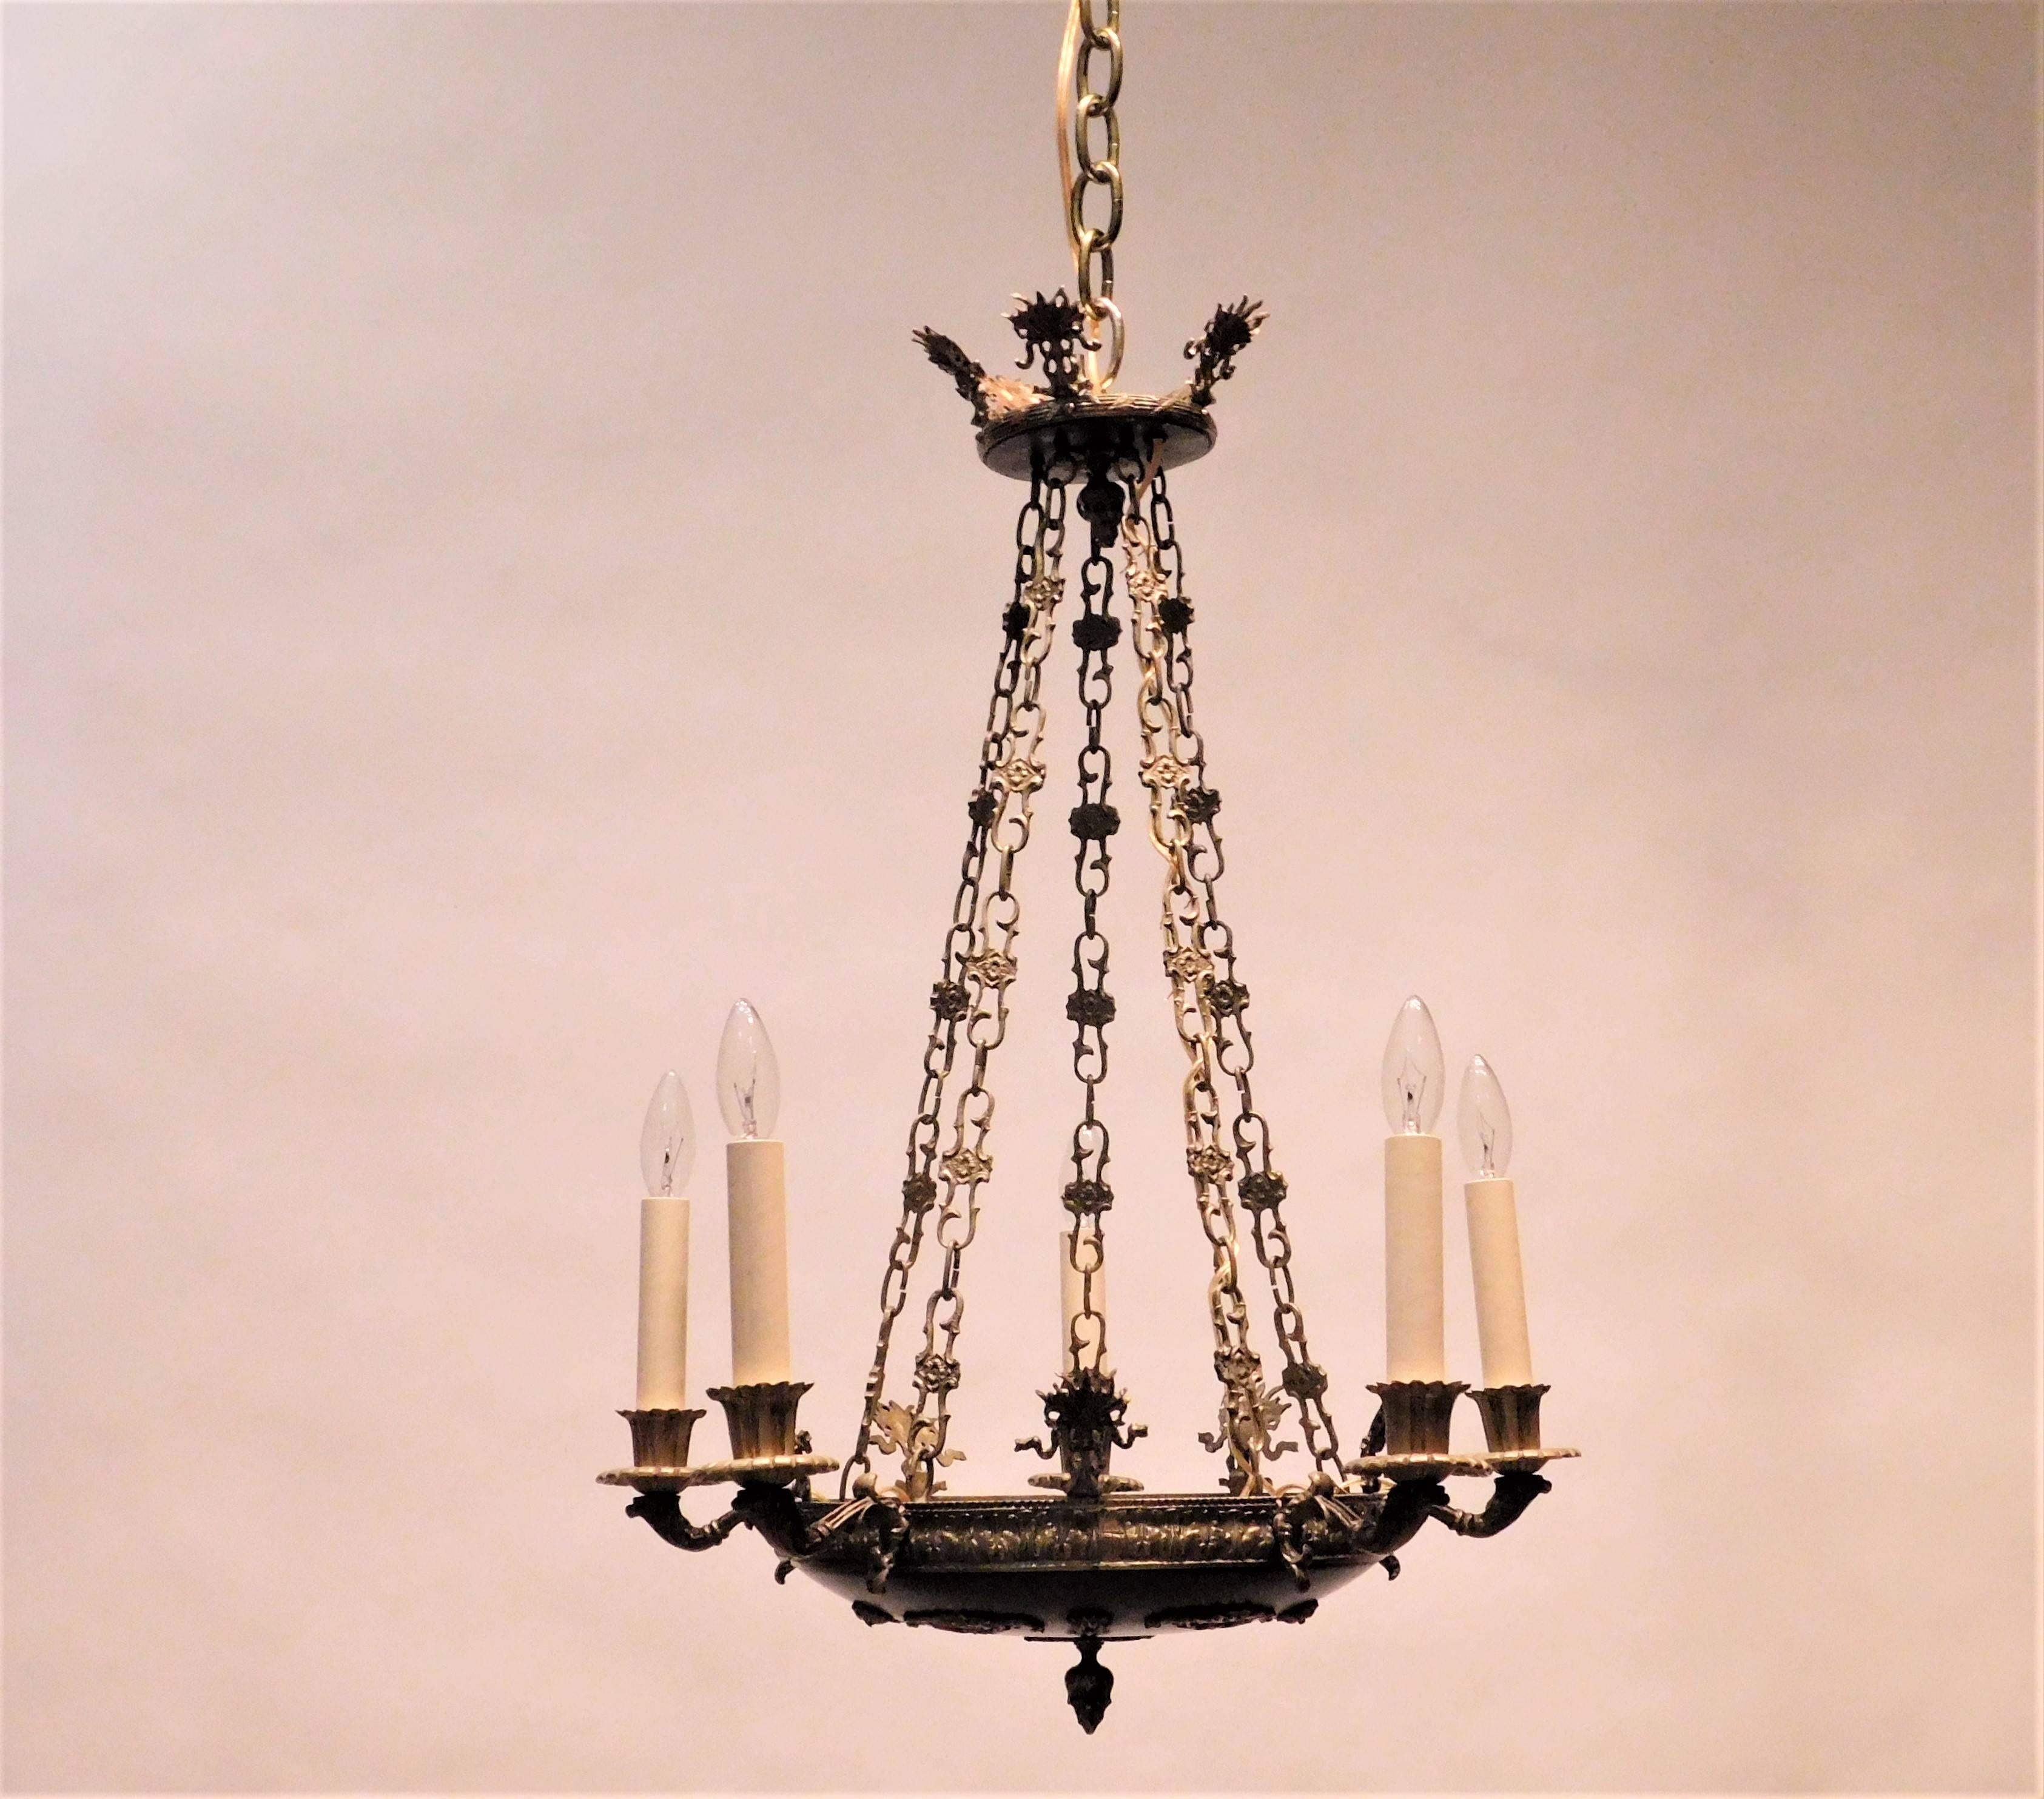 This fixture is brass, gilt brass and patinated brass. It is hand cast and finely wrought. Unique design details. Ceiling cap, hanging hardware, and 1 foot of chain included.